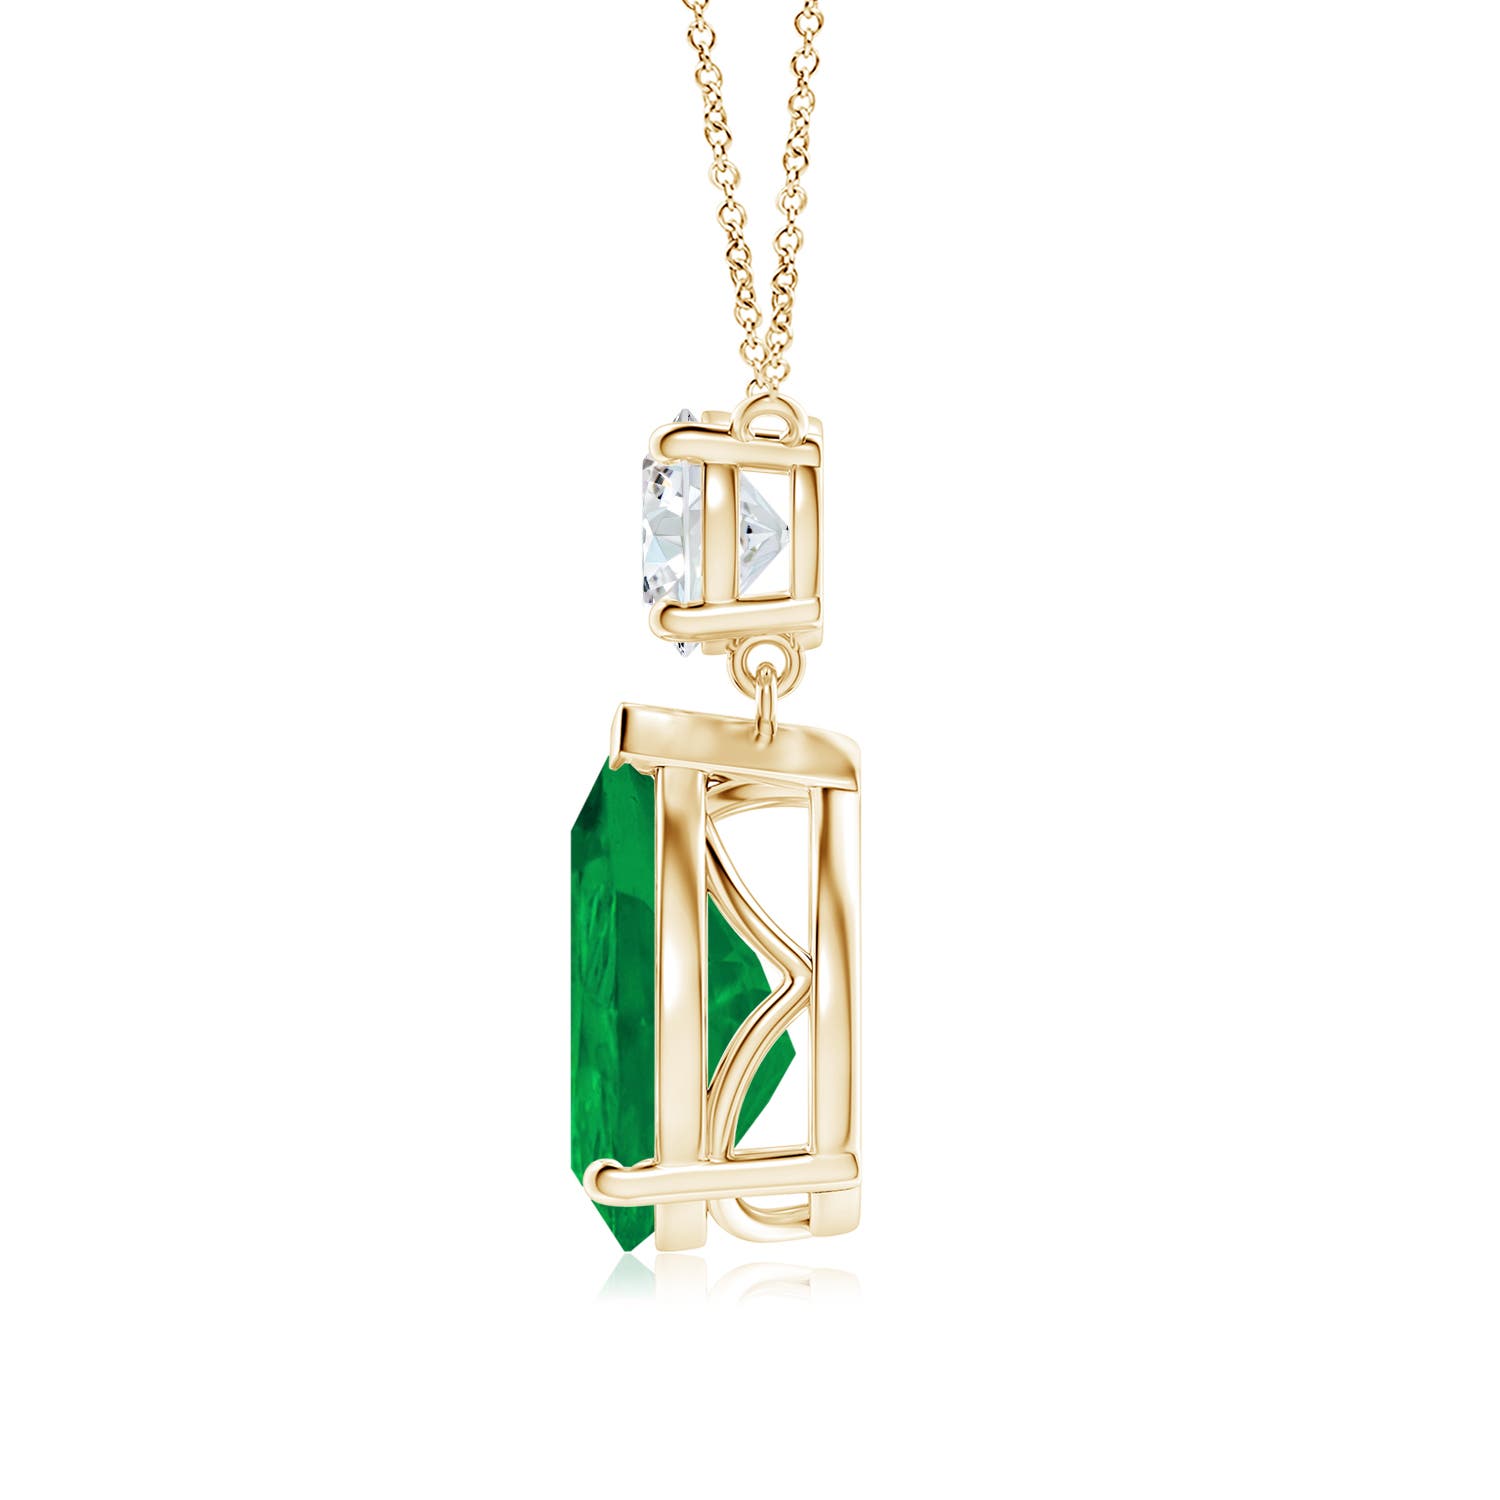 AA - Emerald / 5.21 CT / 14 KT Yellow Gold